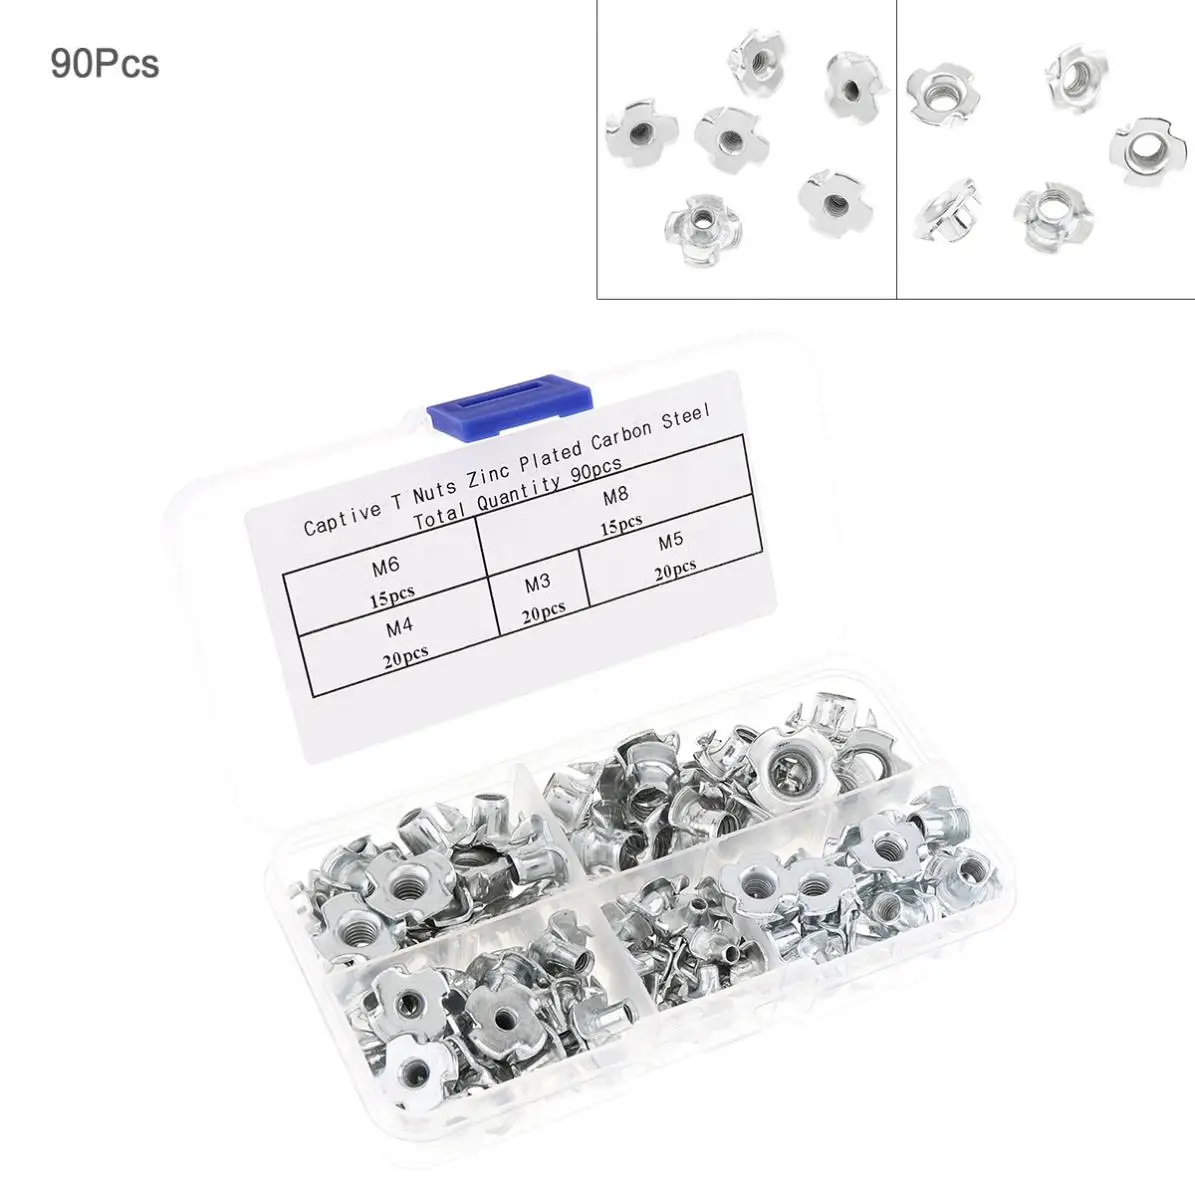 90pcs Zinc Plated Four Claws Nut M3 M4 M5 M6 M8 Speaker Nut T Nut Blind Pronged Tee Nut Furniture Hardware Hand Tool Sets